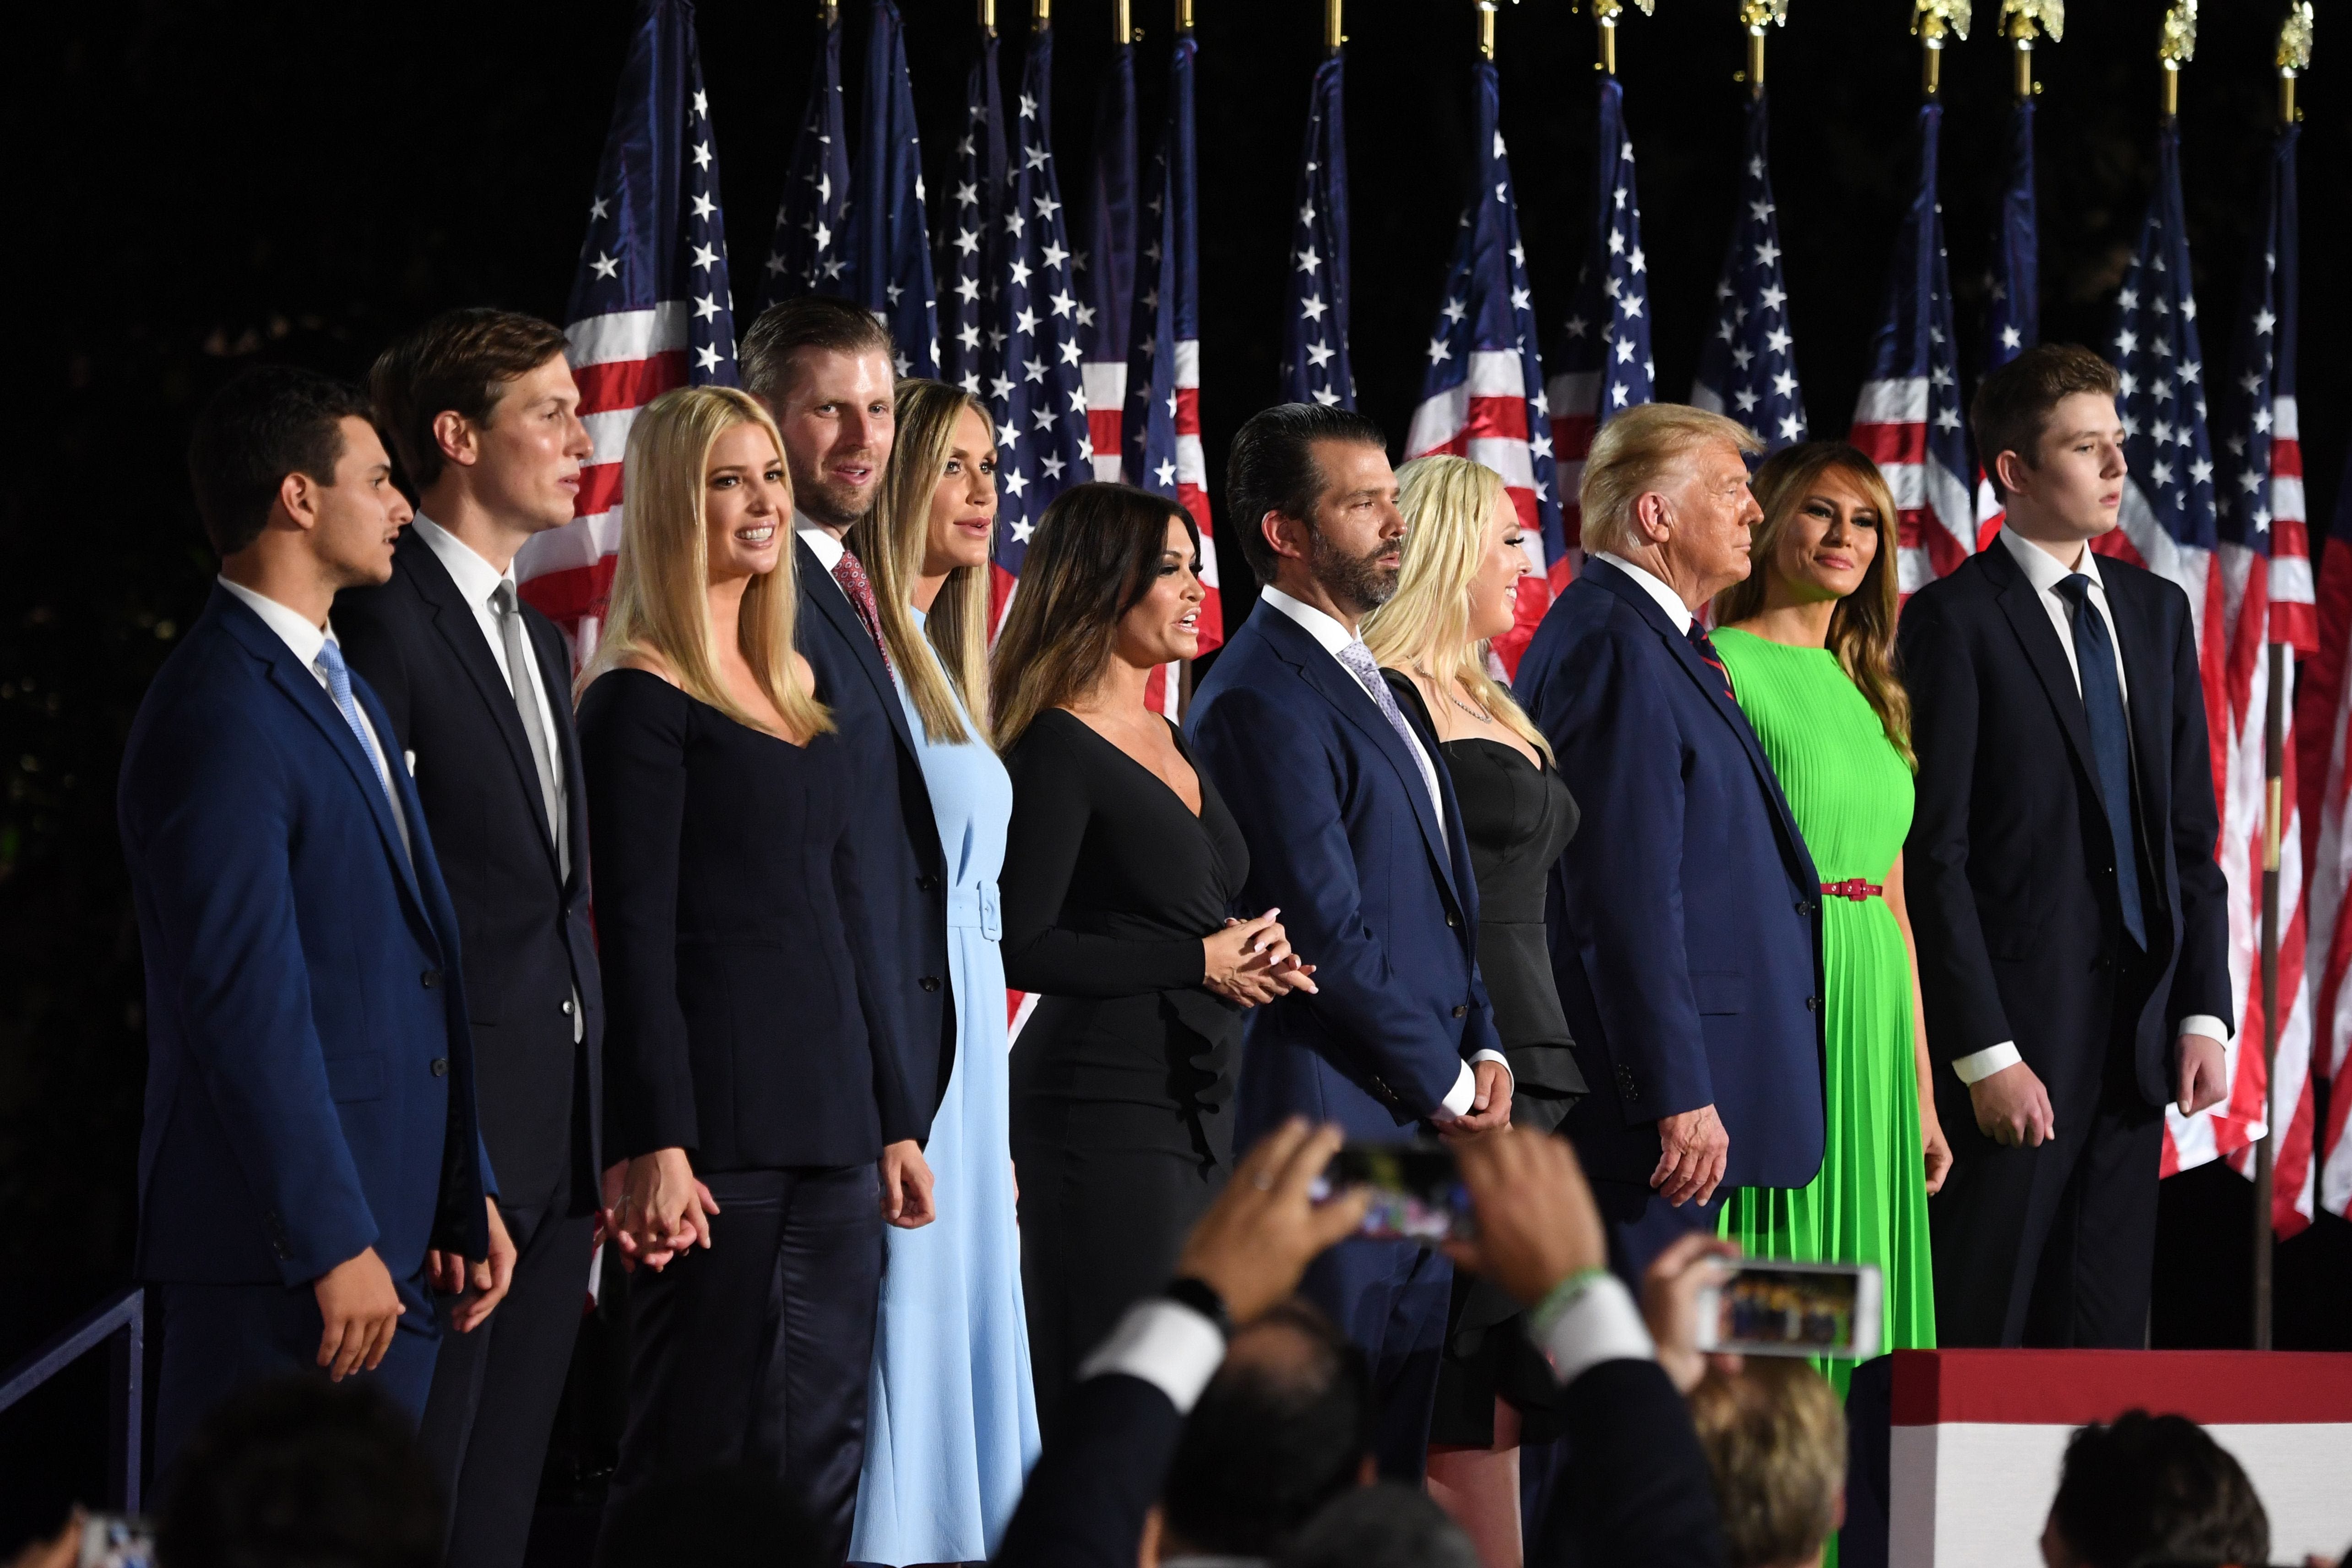 Trump's family reacts to assassination attempt: 'I love you Dad'